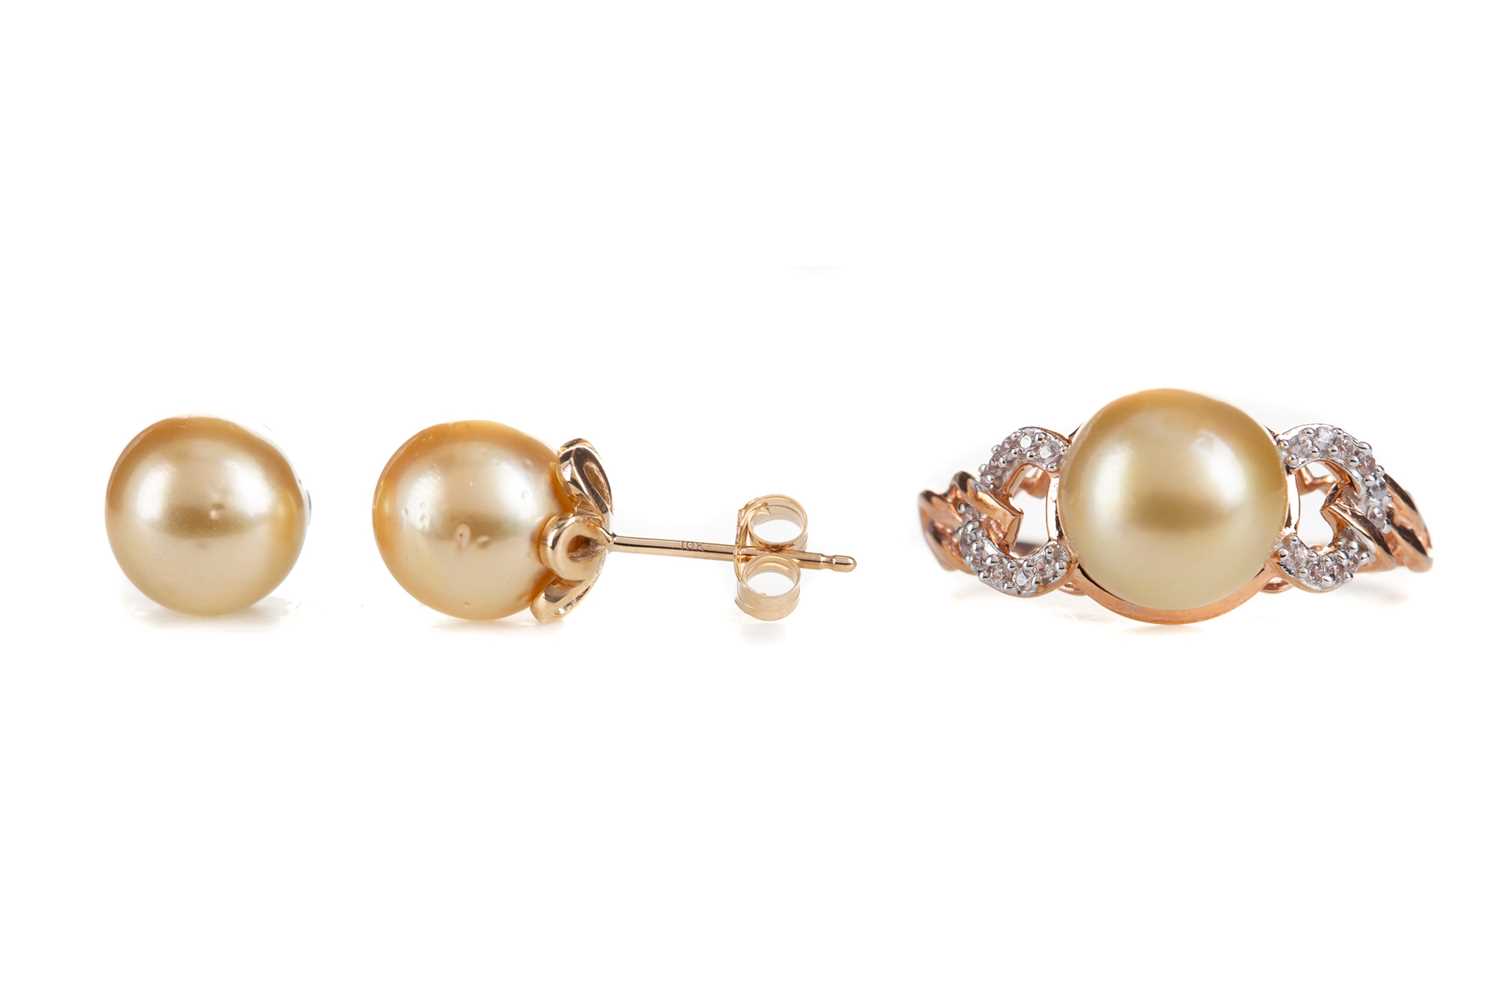 Lot 468 - A GOLDEN PEARL AND DIAMOND RING ALONG WITH A PAIR OF EARRINGS